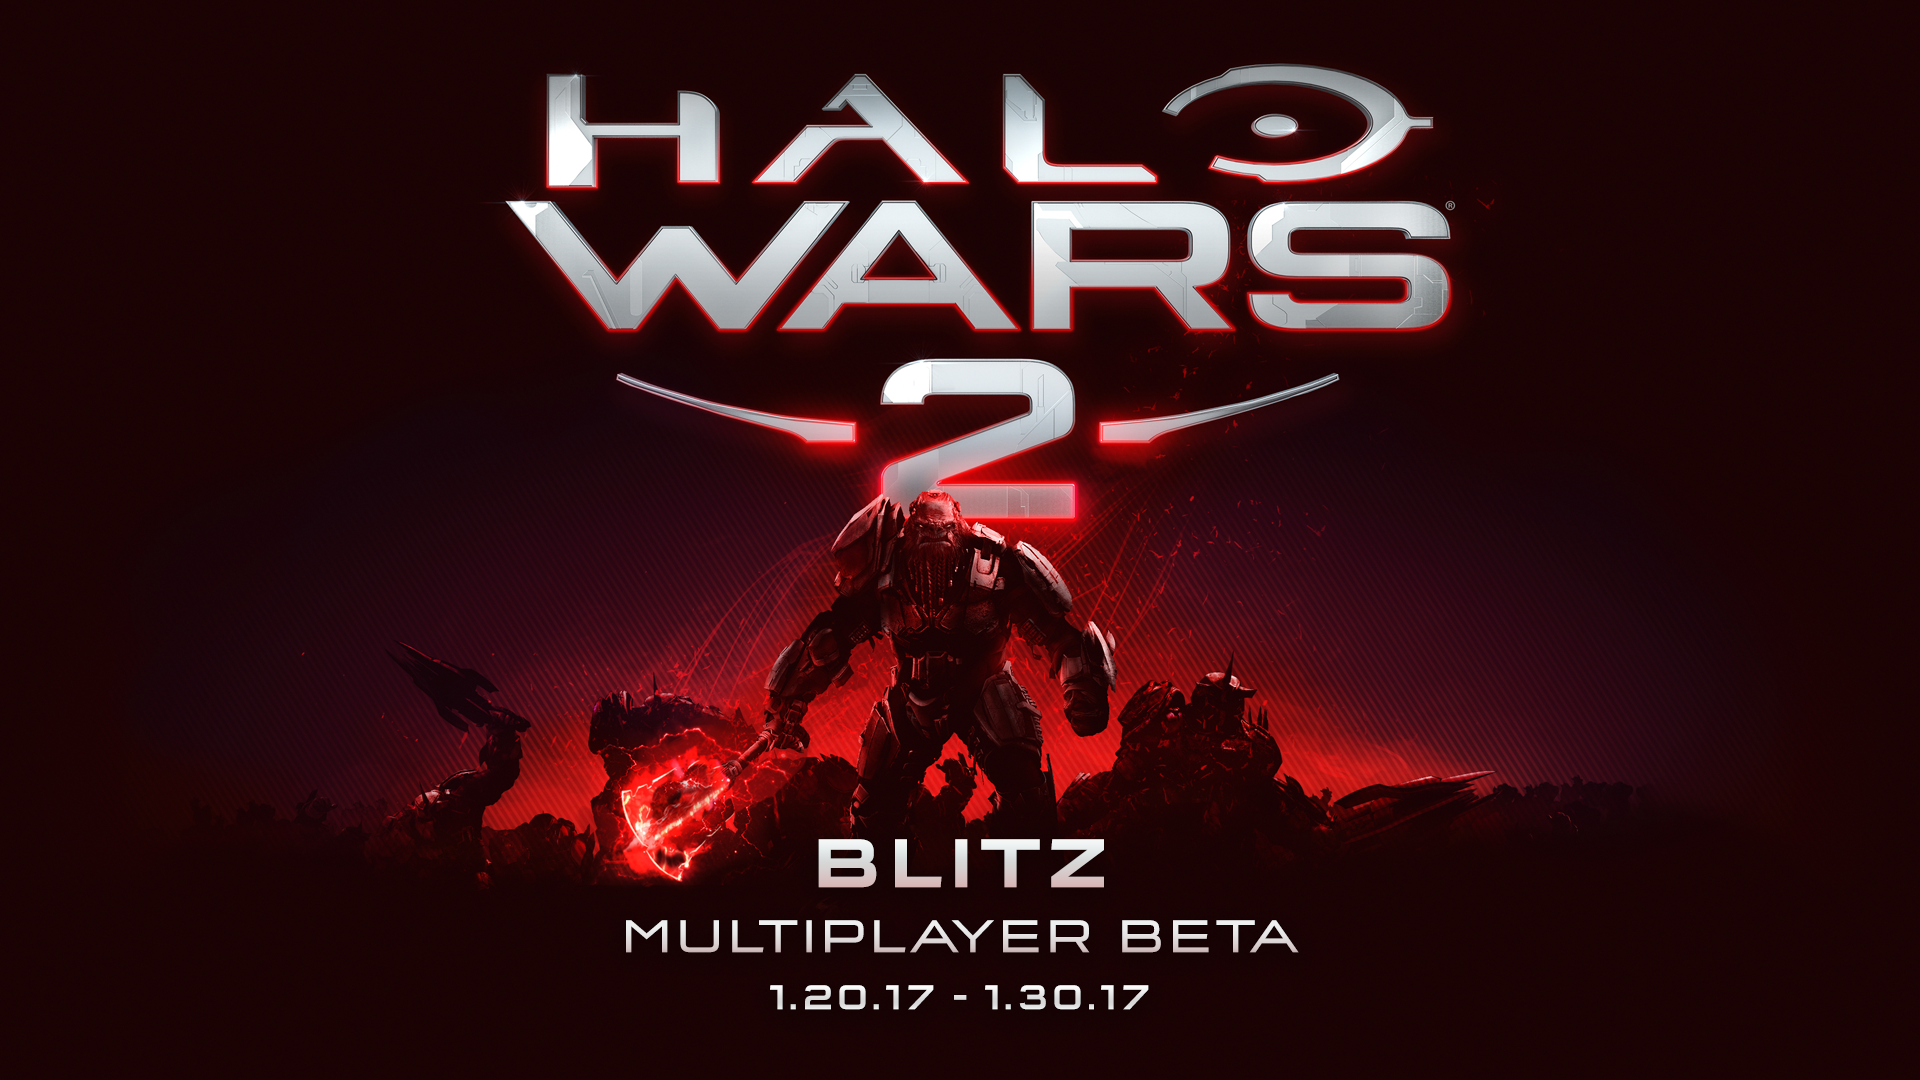 Video For Halo Wars 2 Blitz Beta Coming January 20